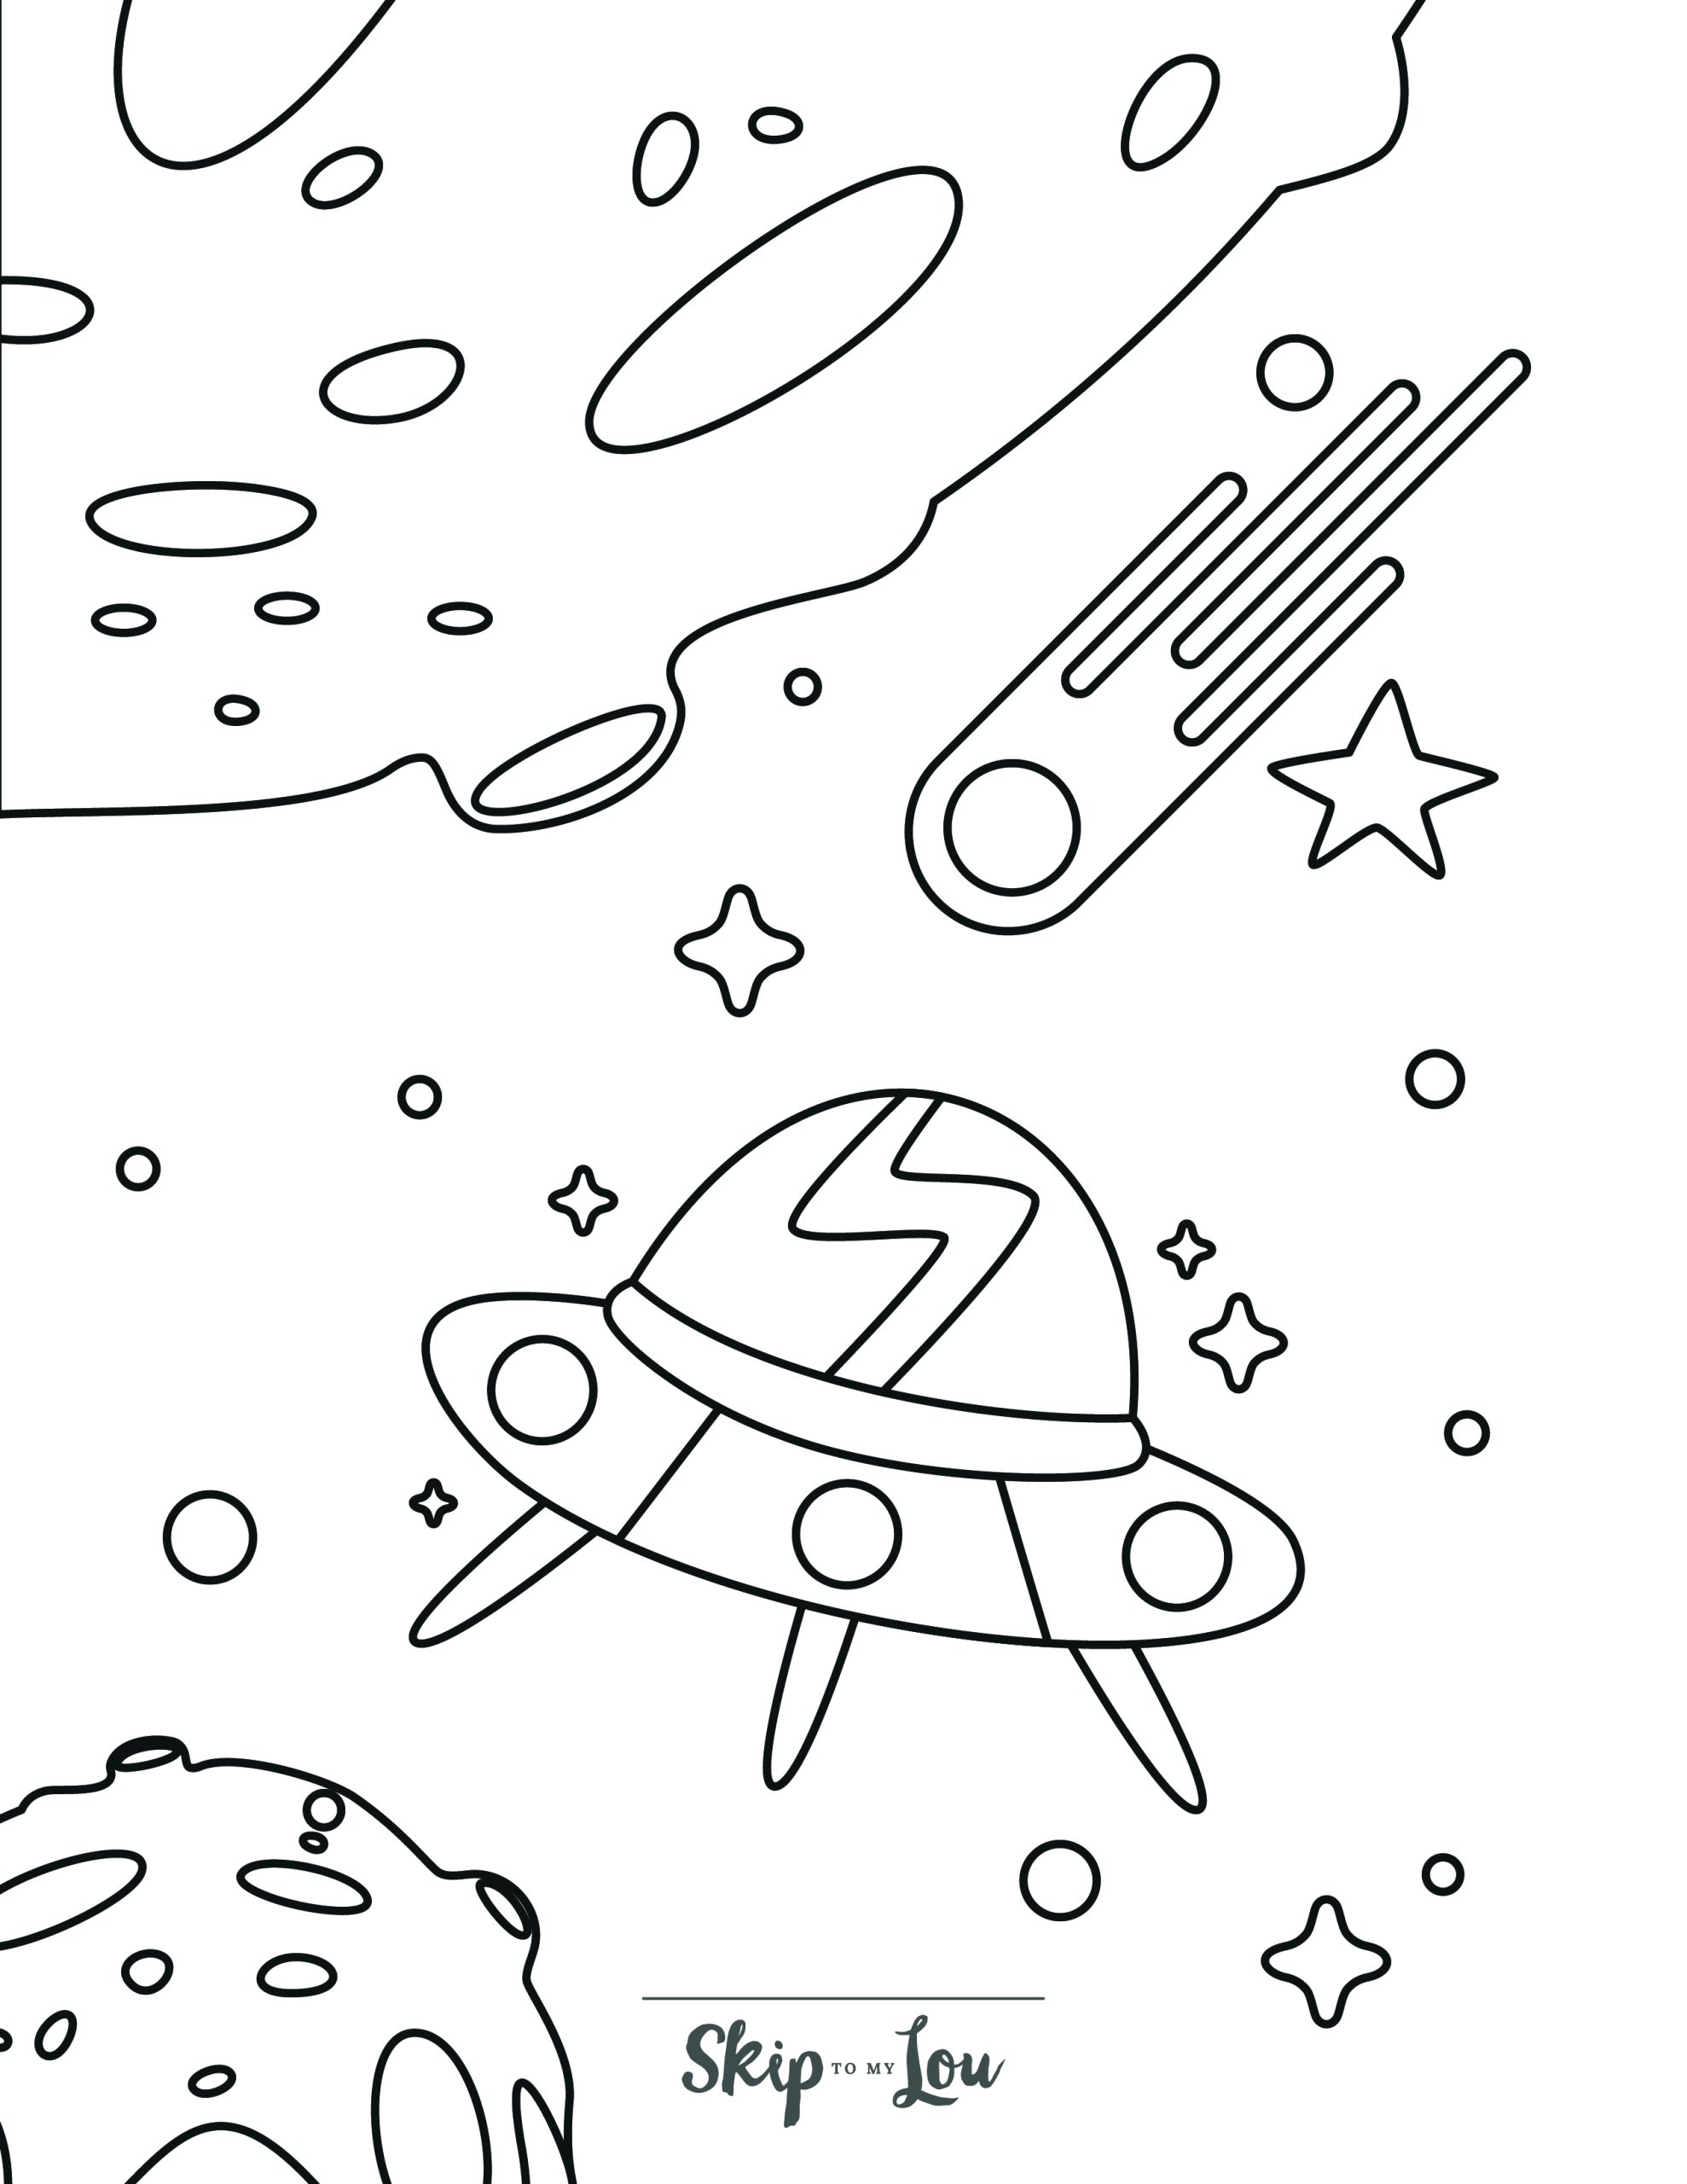 Space Coloring Page 1 - Space scene of UFO with large moon, meteor and stars in background